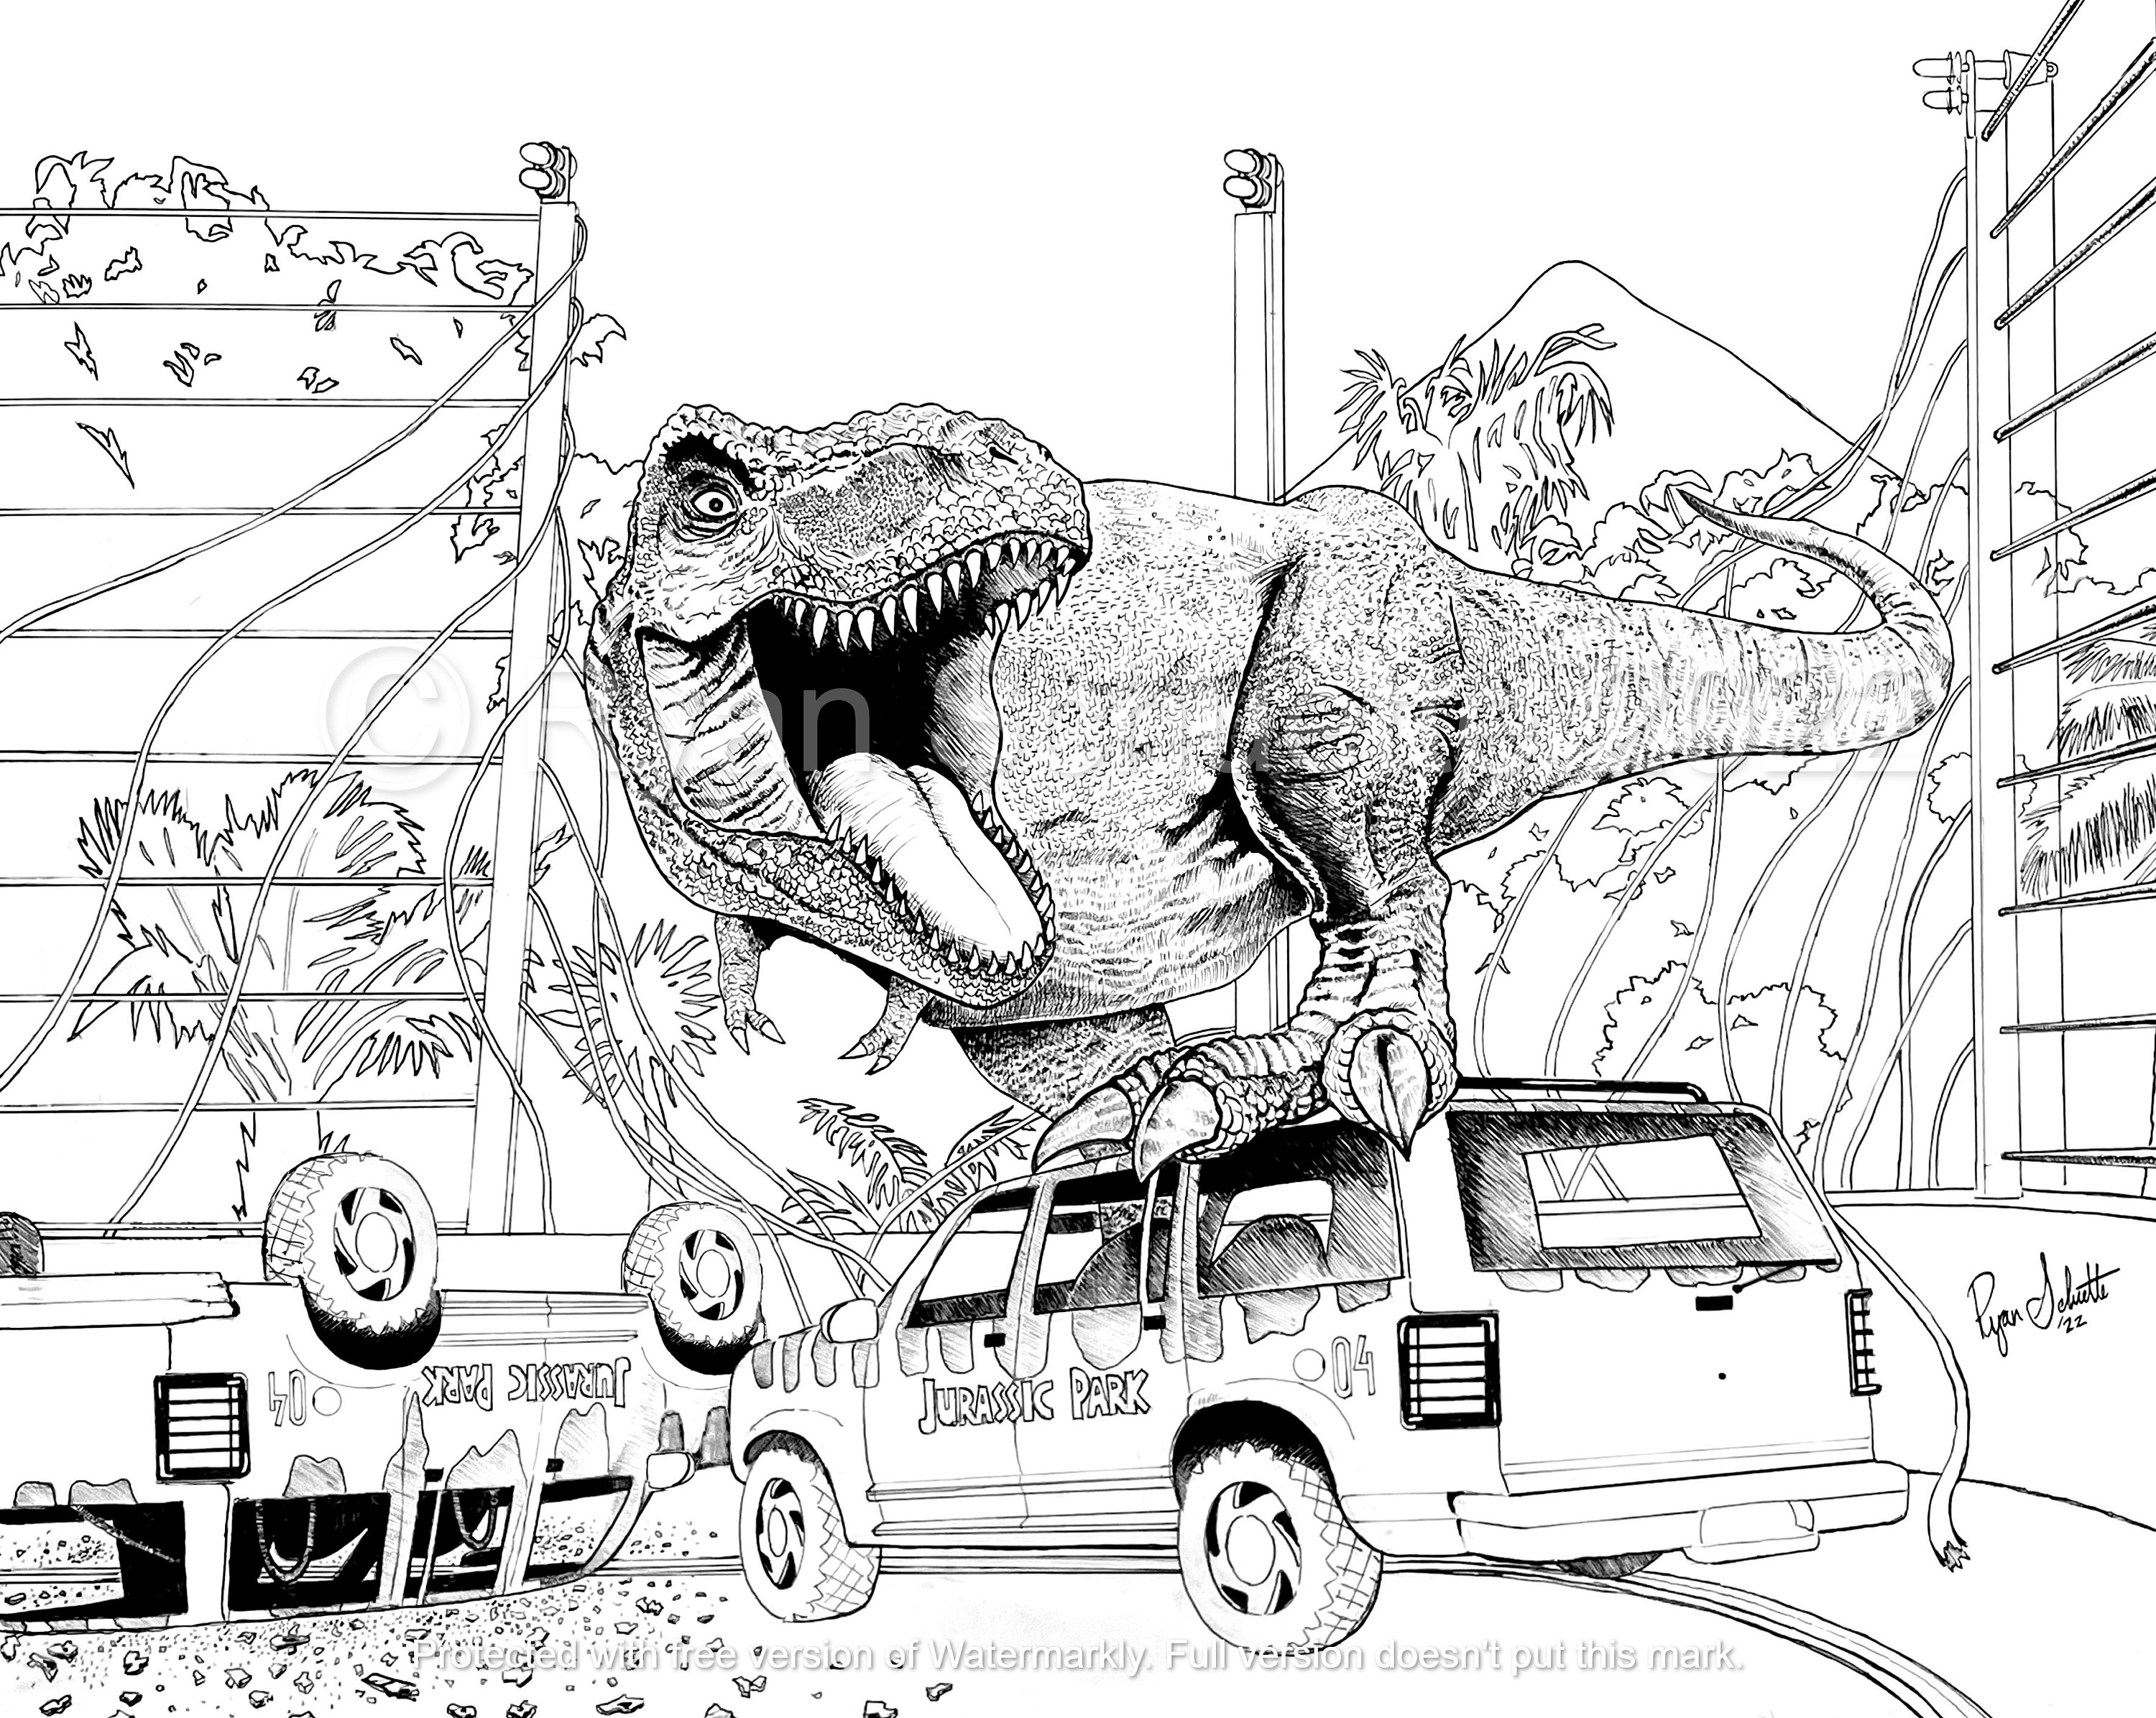 Free Jurassic World Coloring Pages